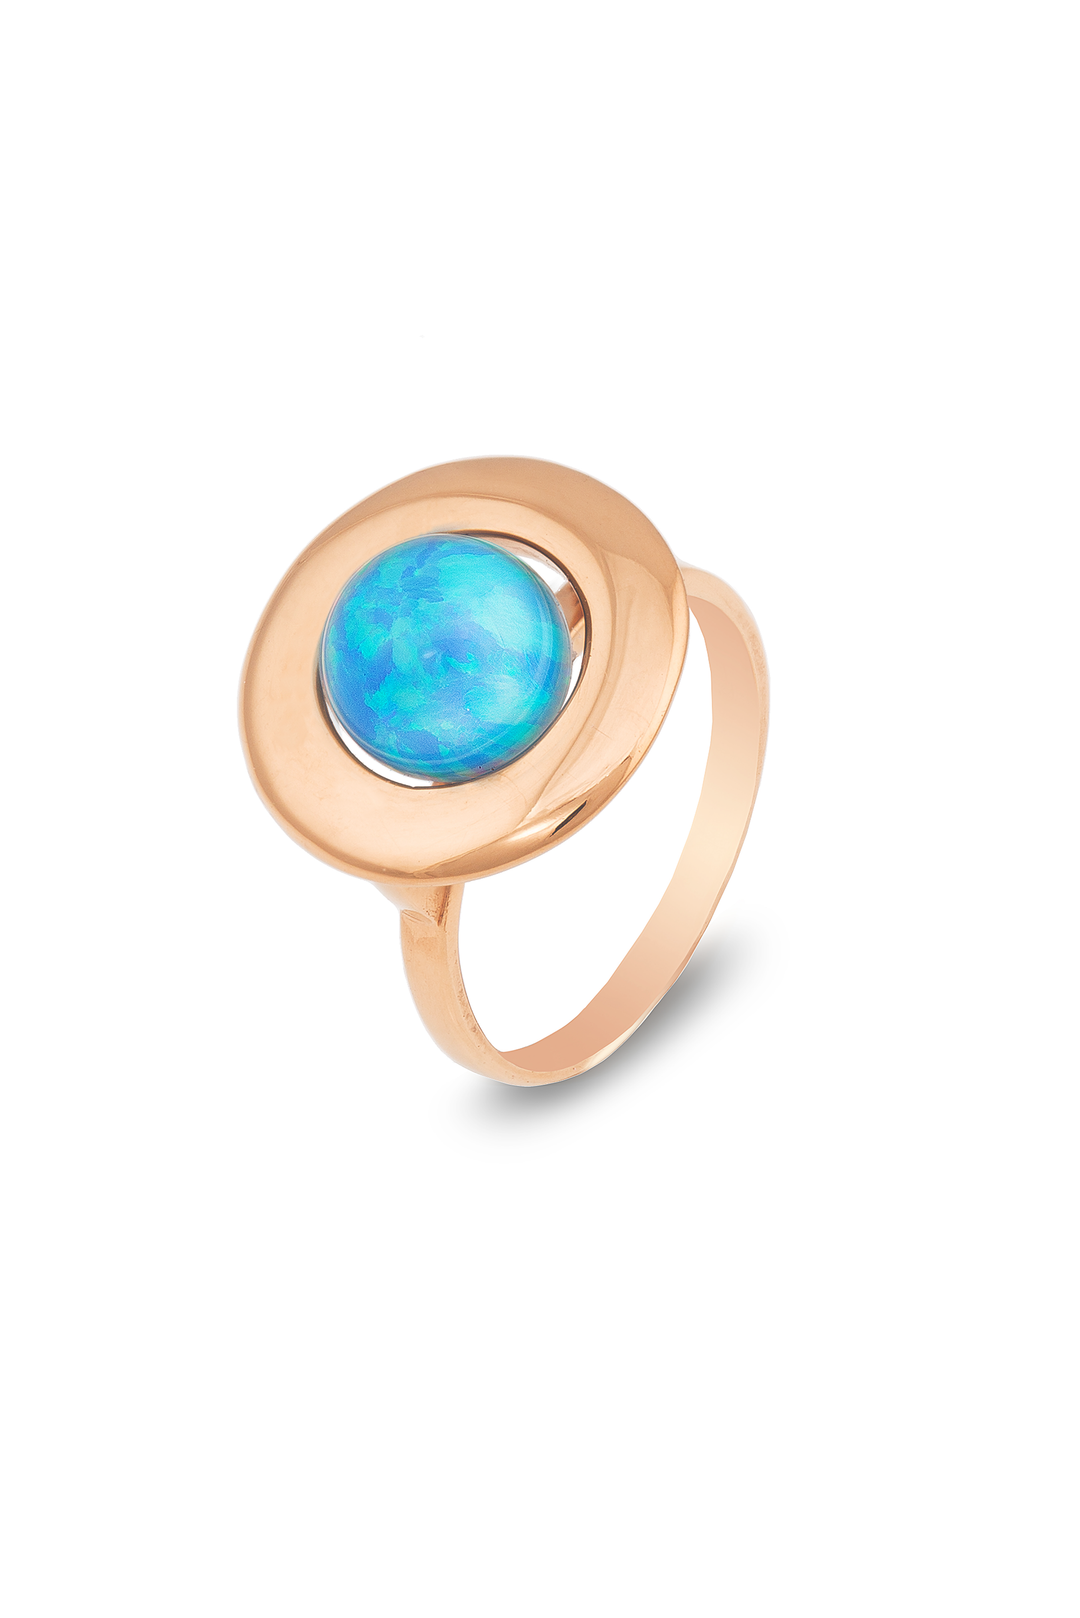 Home Planet Blue Sky Opal 9ct Gold